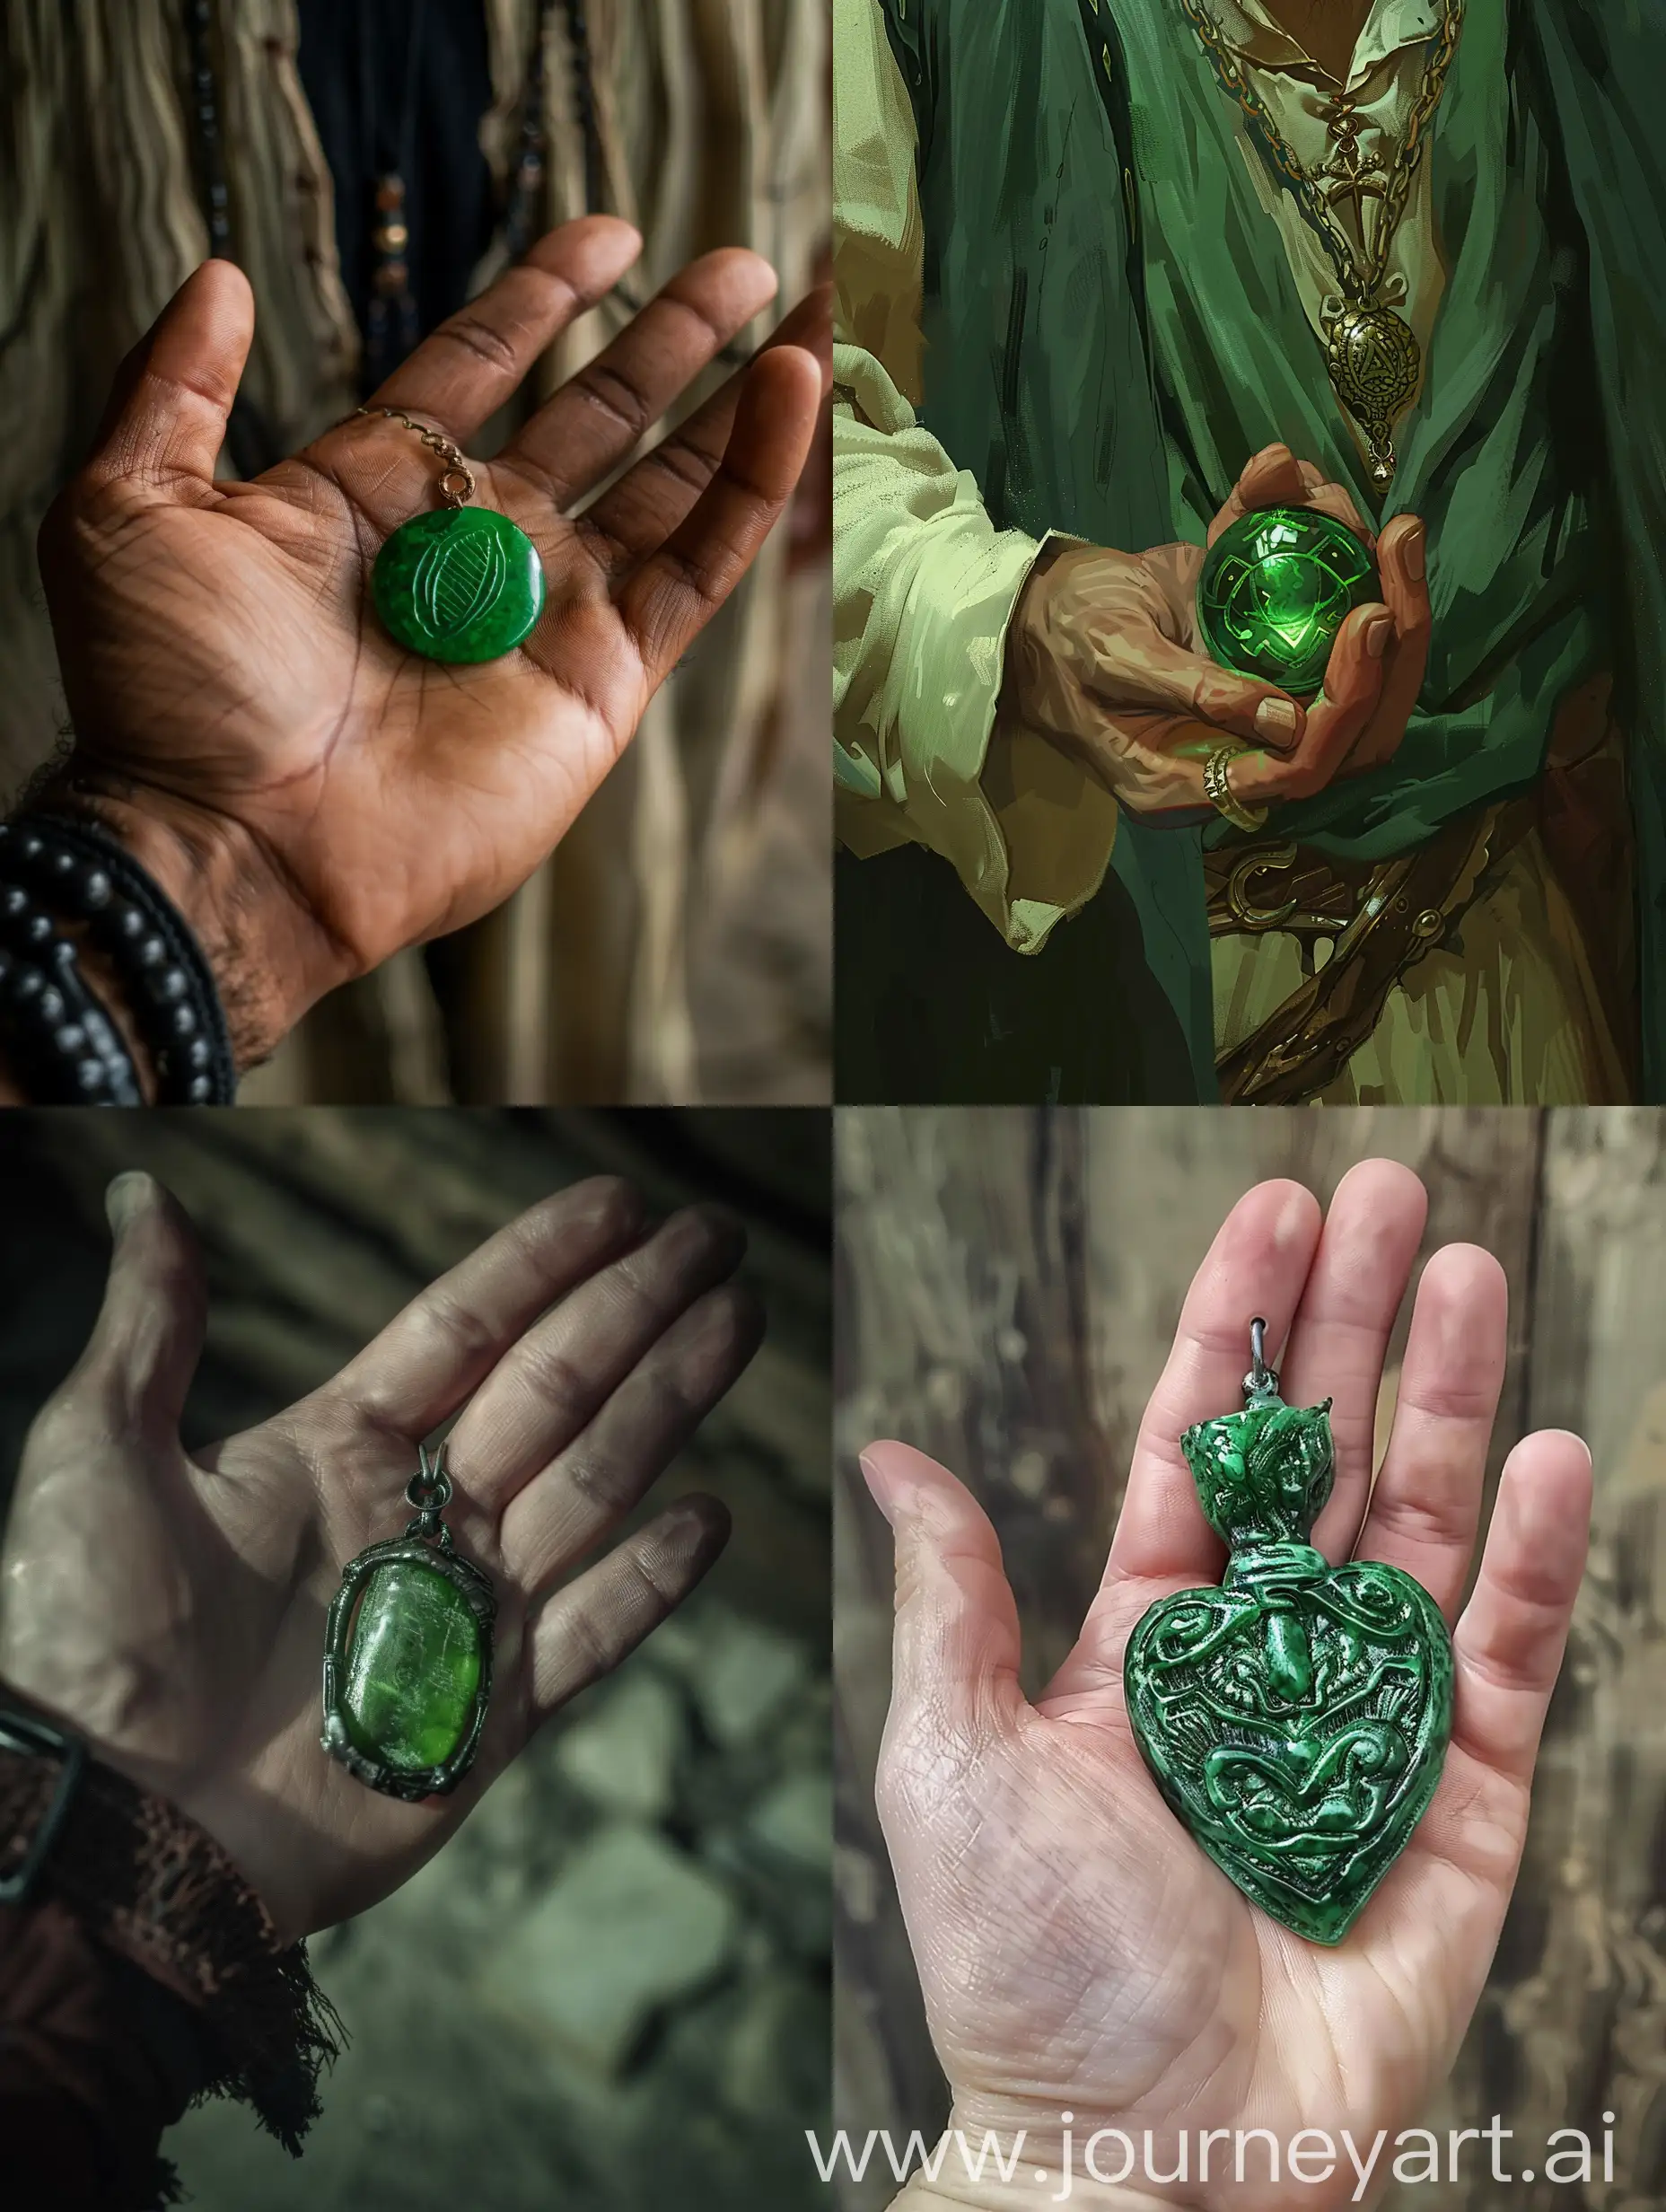 The green amulet in the guy's hand, ranobe style.